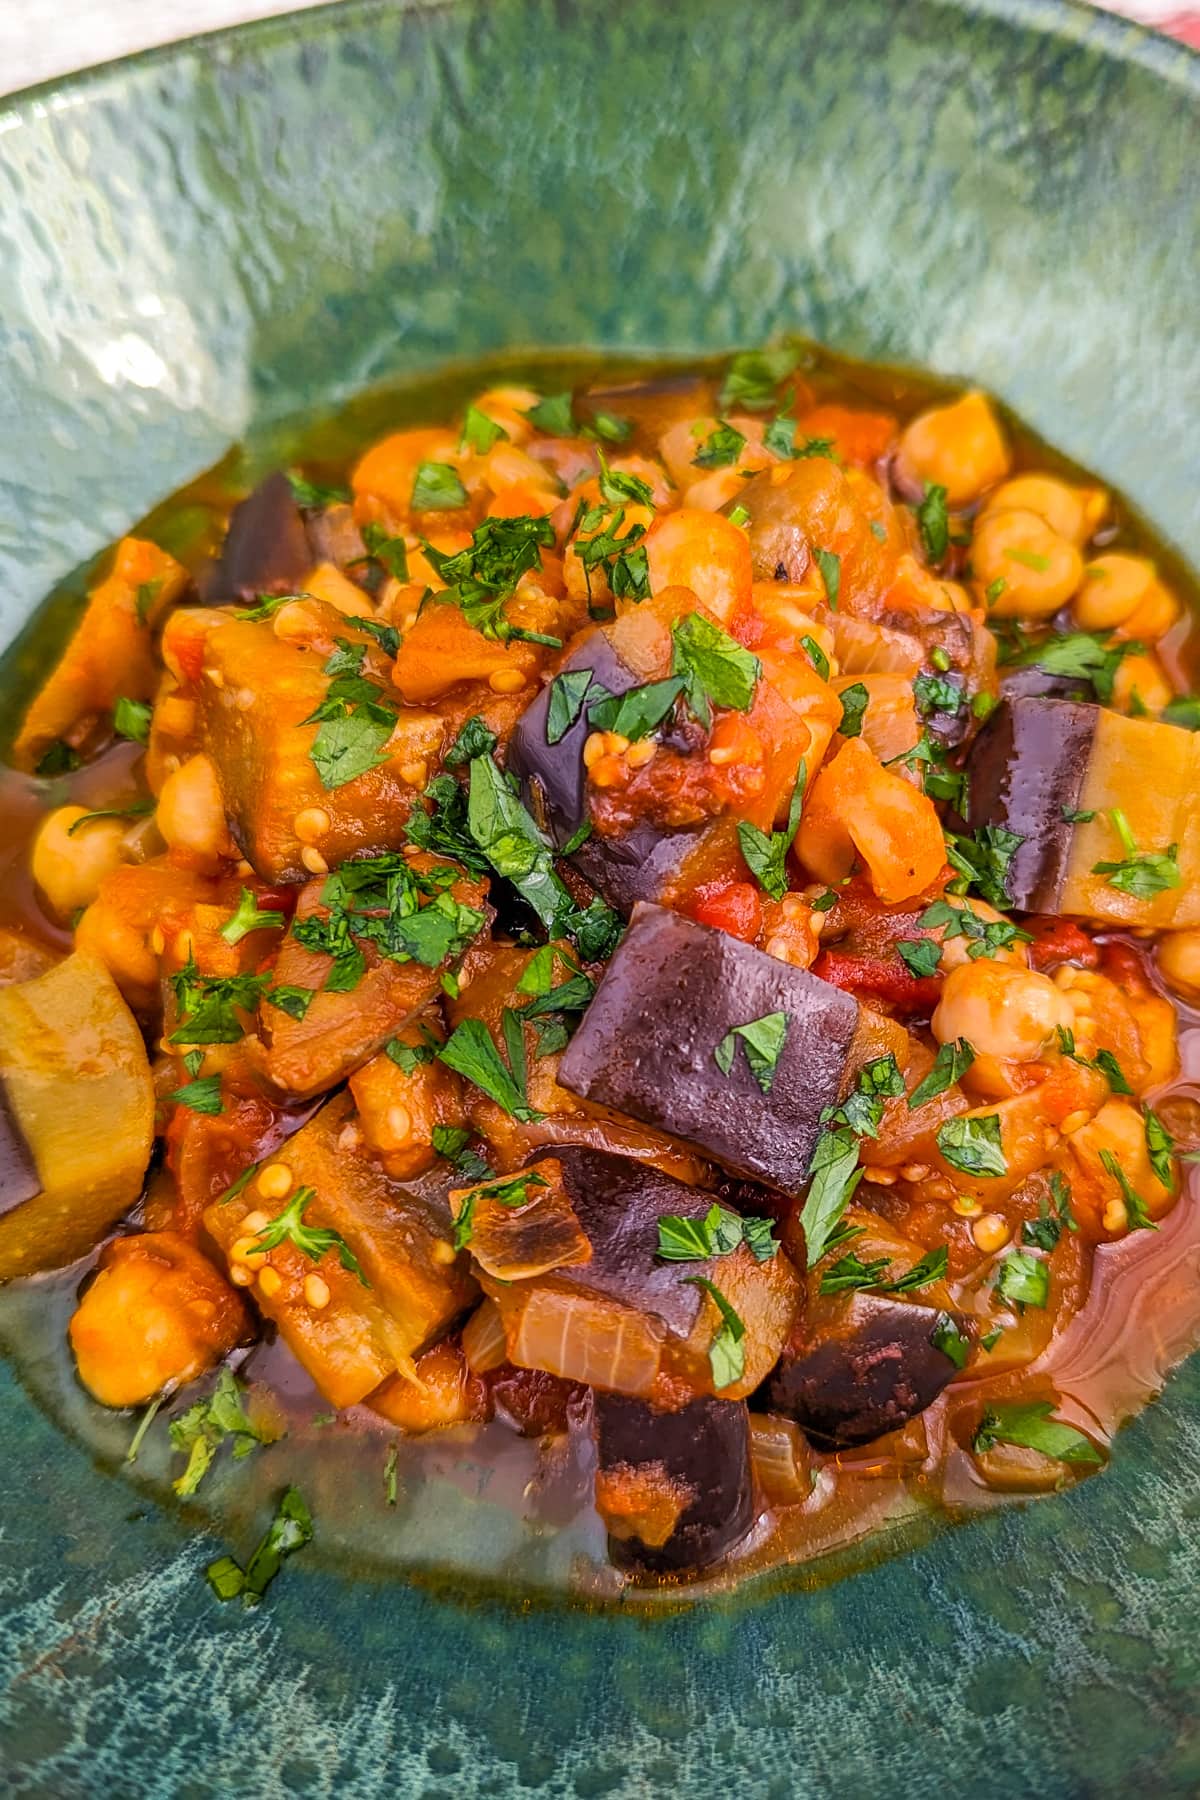 Vintage green plate with eggplant and chickpea stew and freshly chopped parsley.